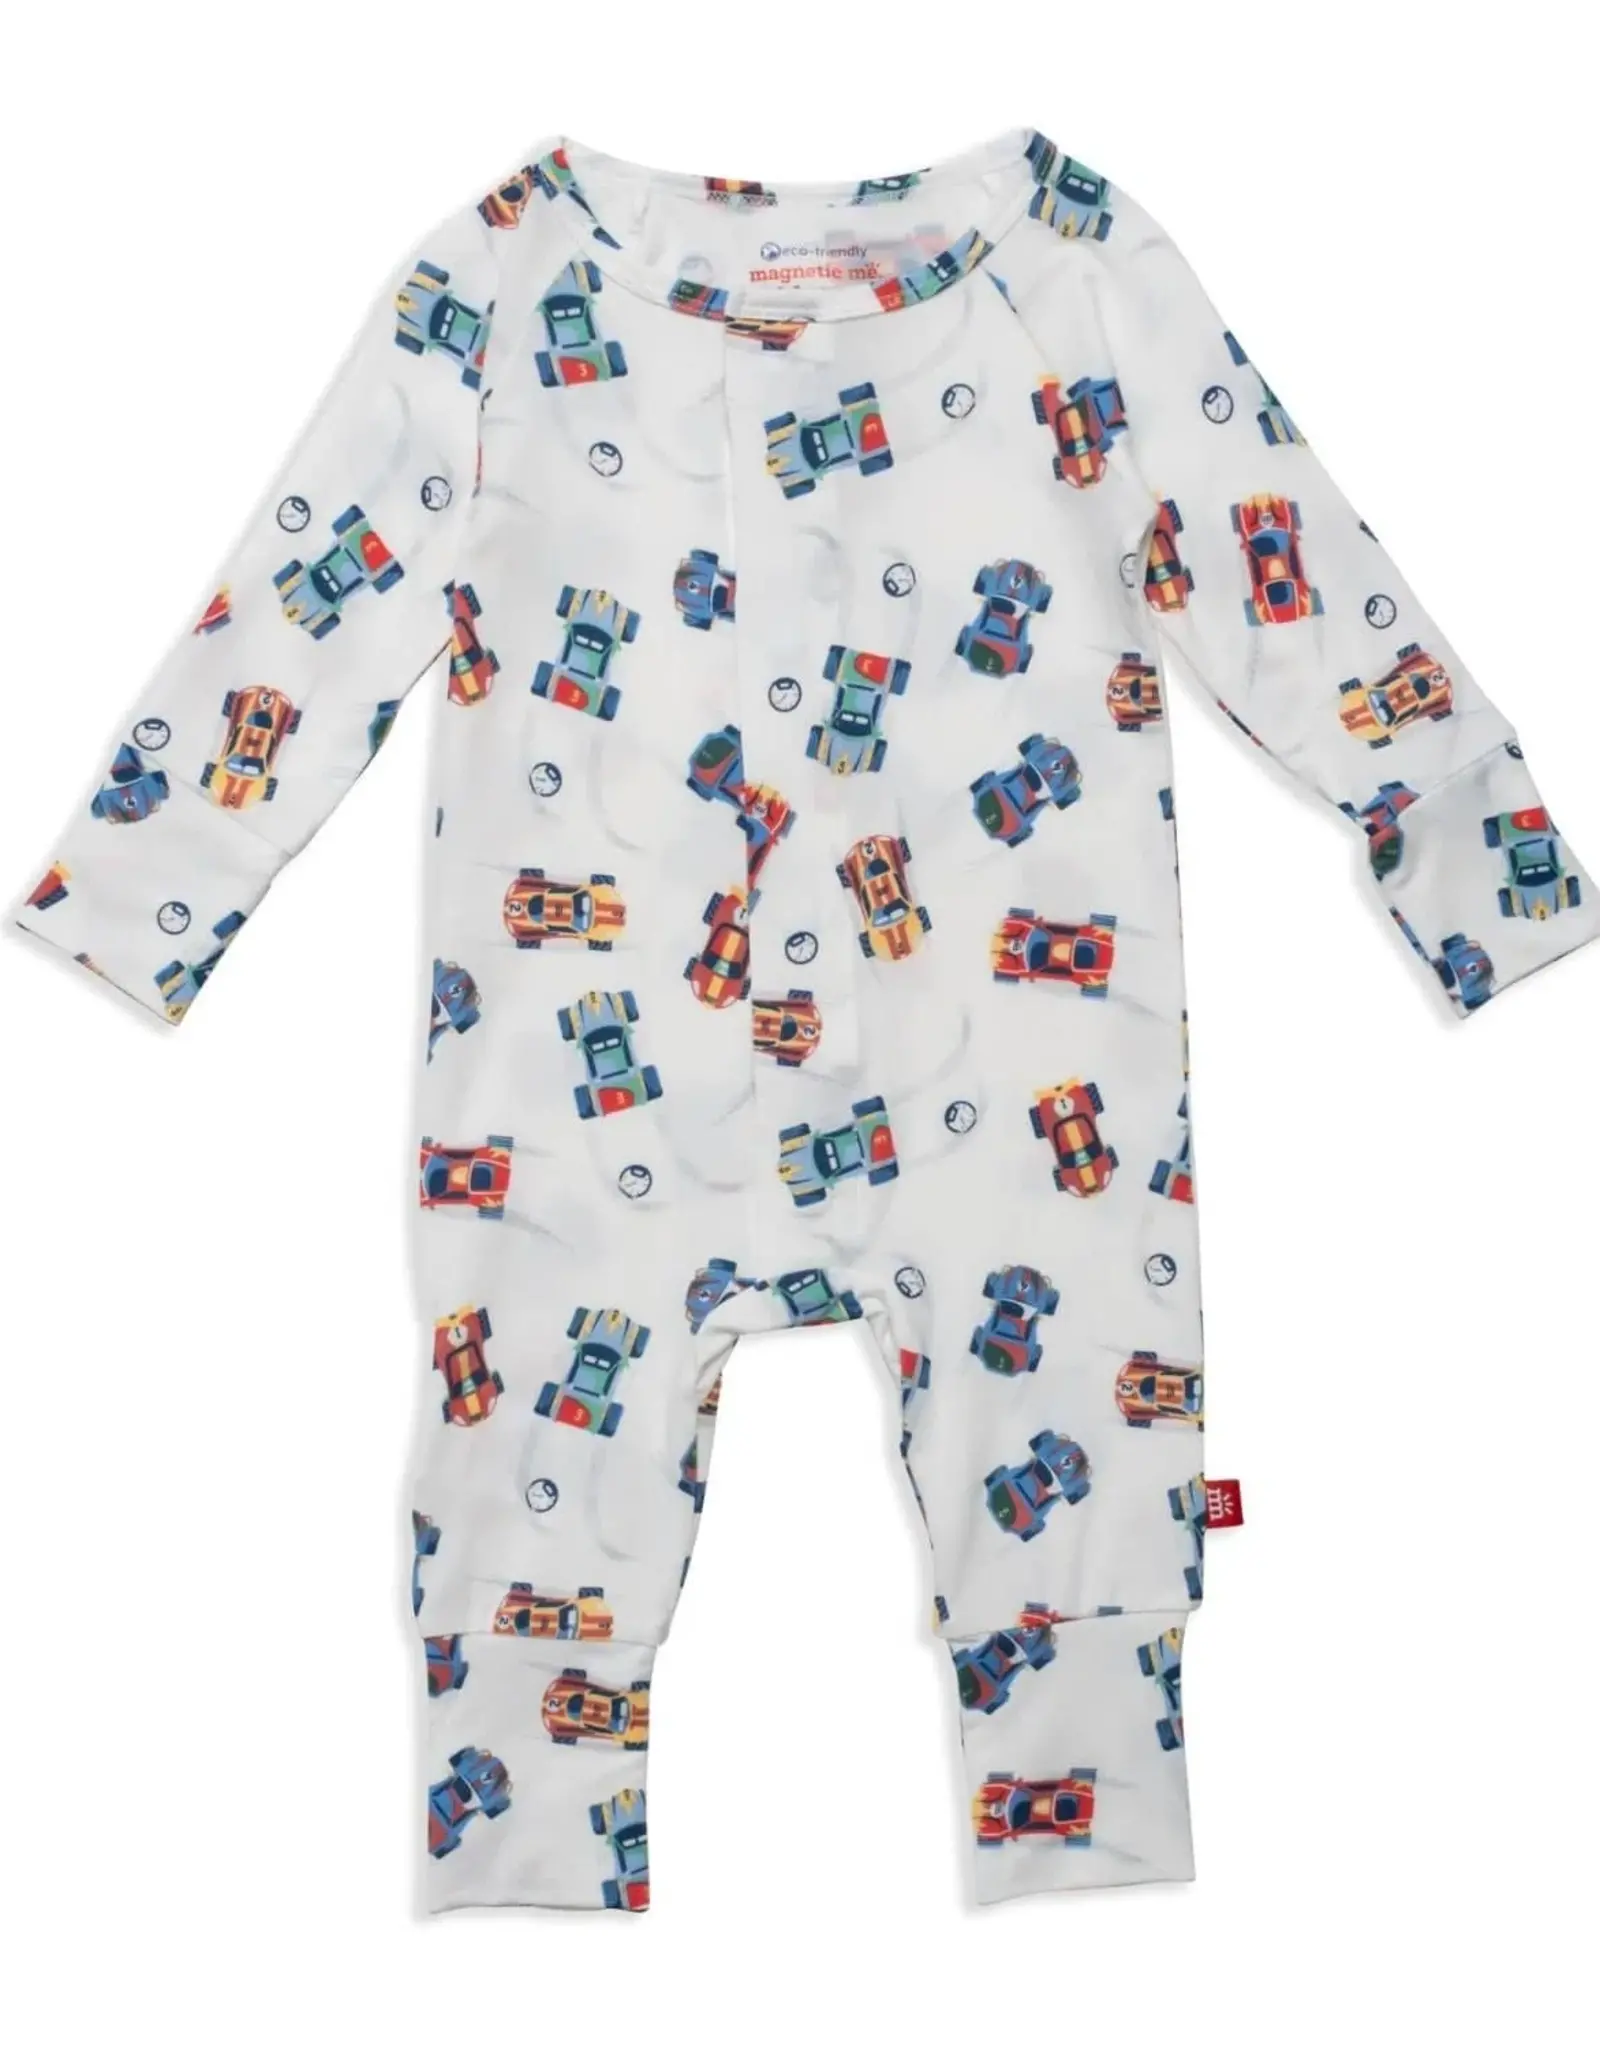 Magnetic Me 6-9MO: Coverall - Formula Fun Convertible Grow With Me